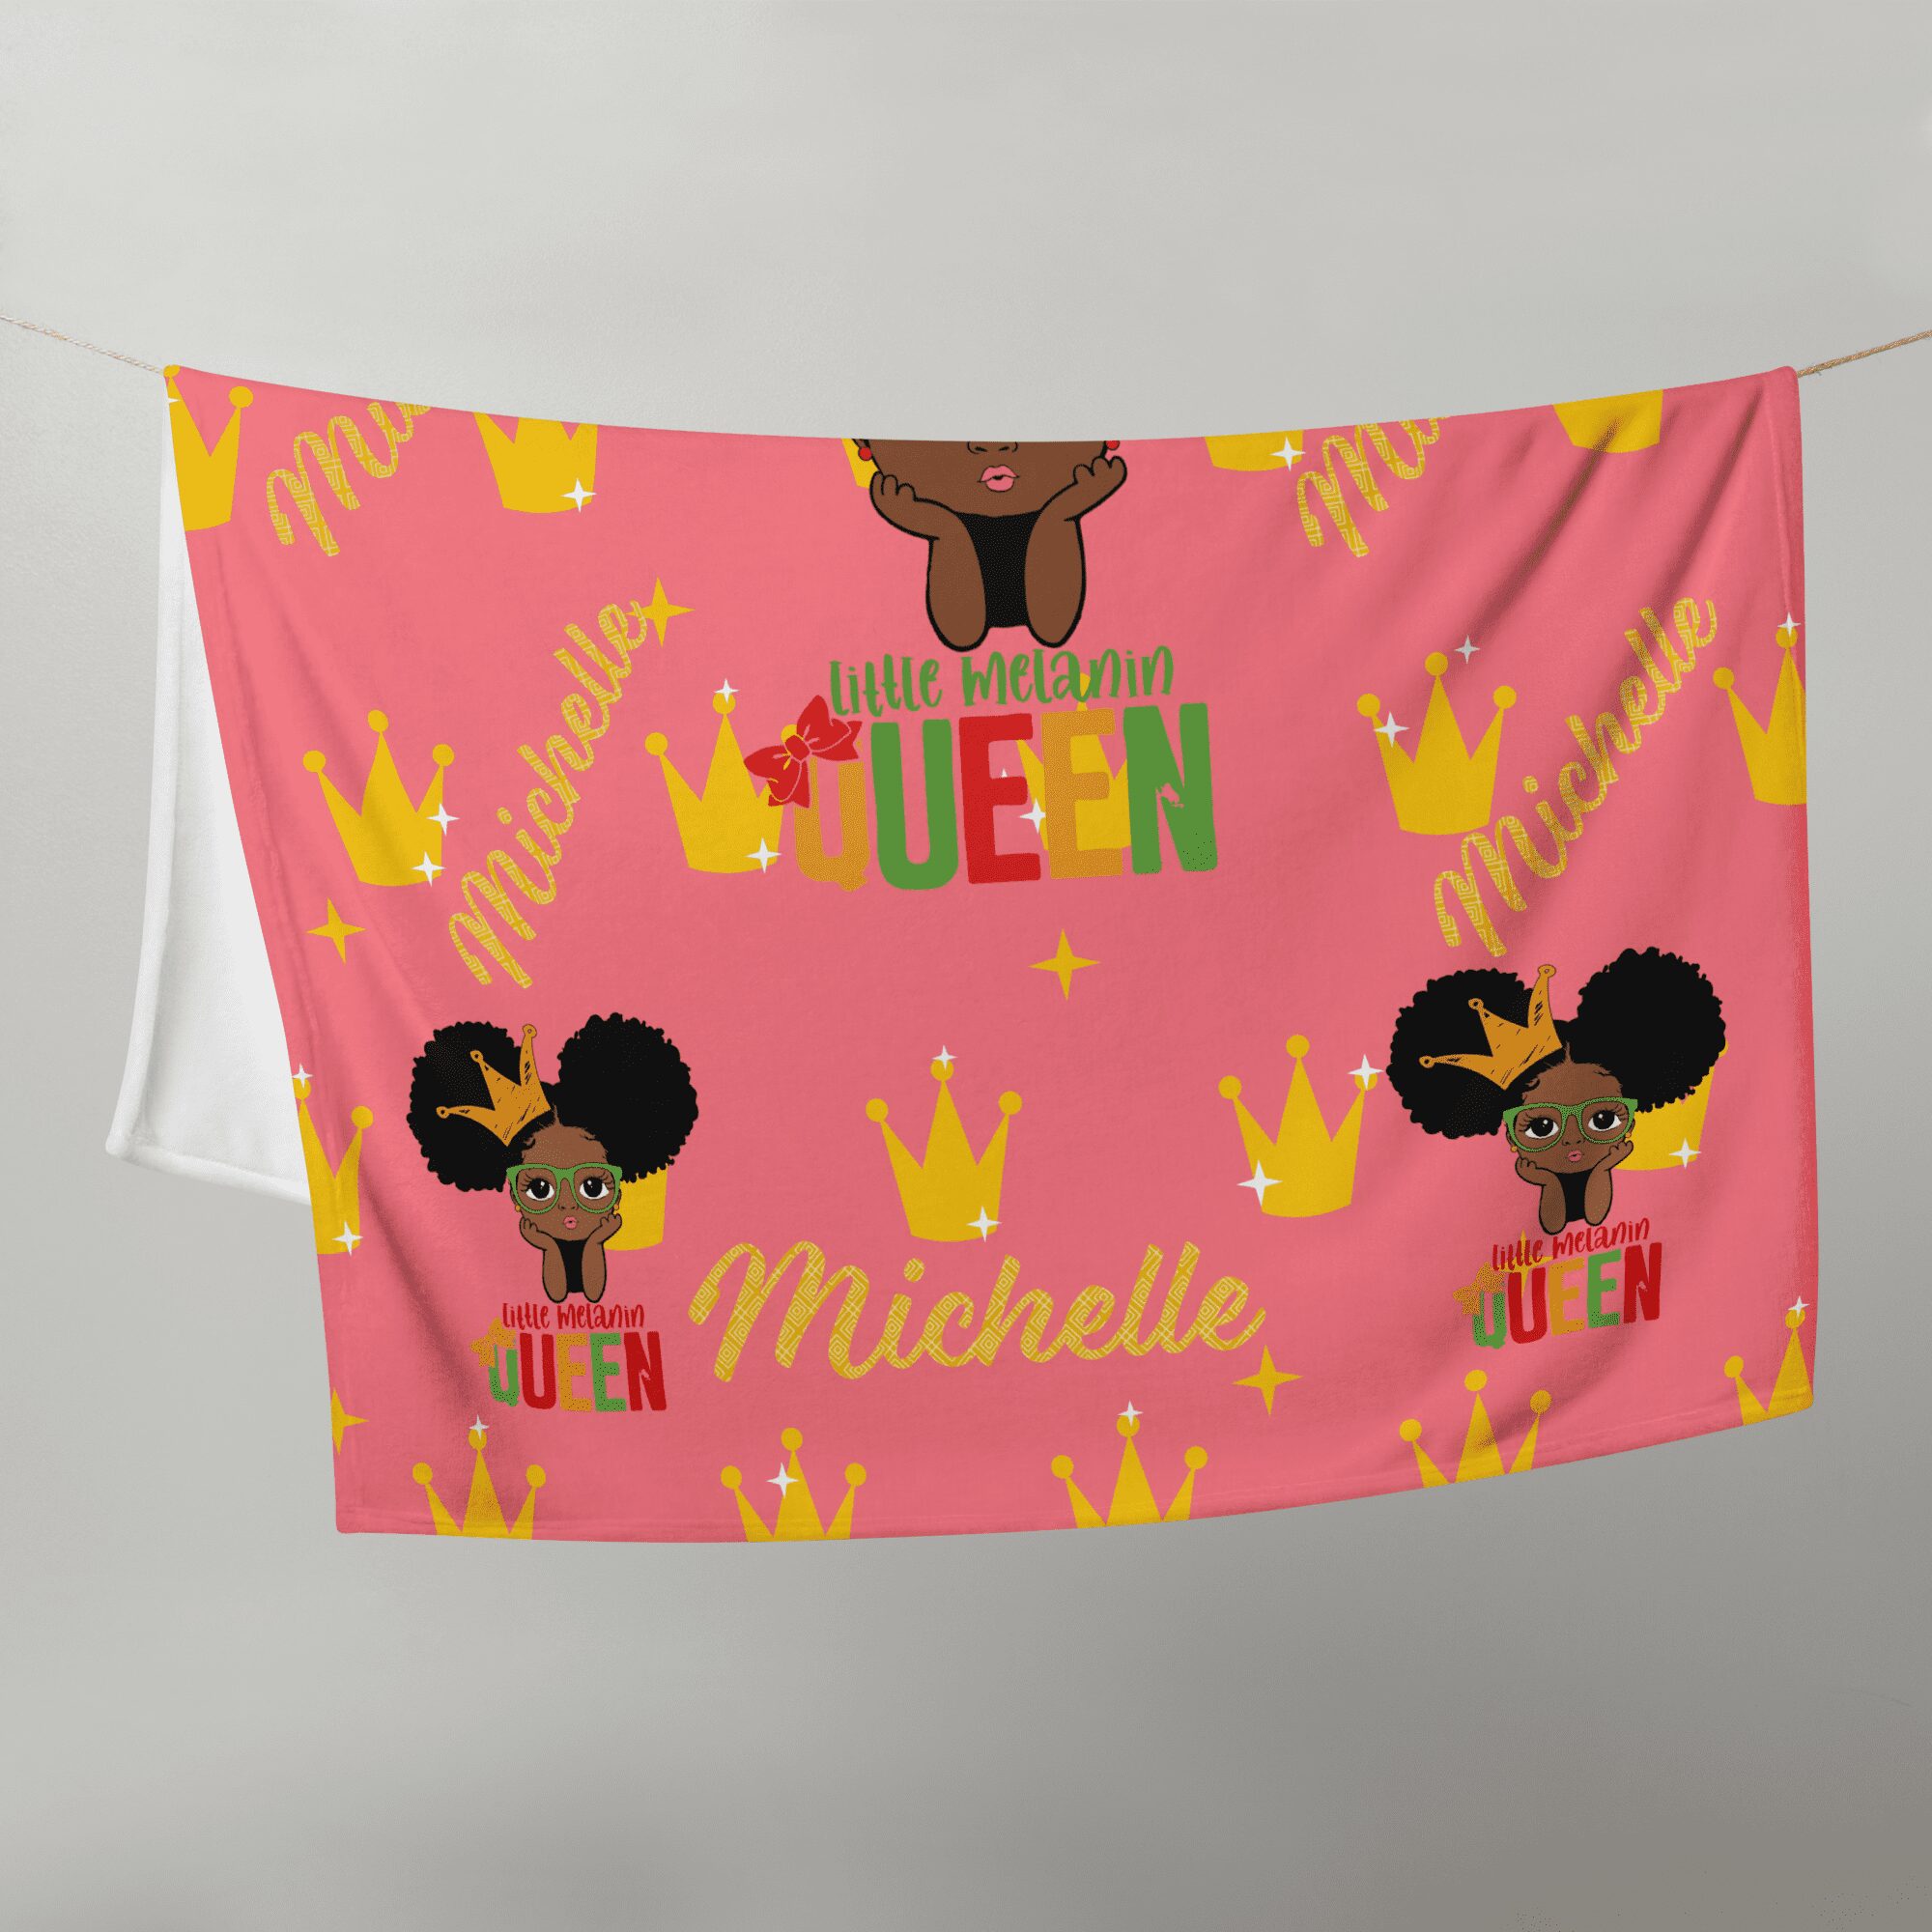 Personalised Little Melanin Queen Blanket, wakuda, black-owned, wakuda, african print fans, black-owned brands, black pound day